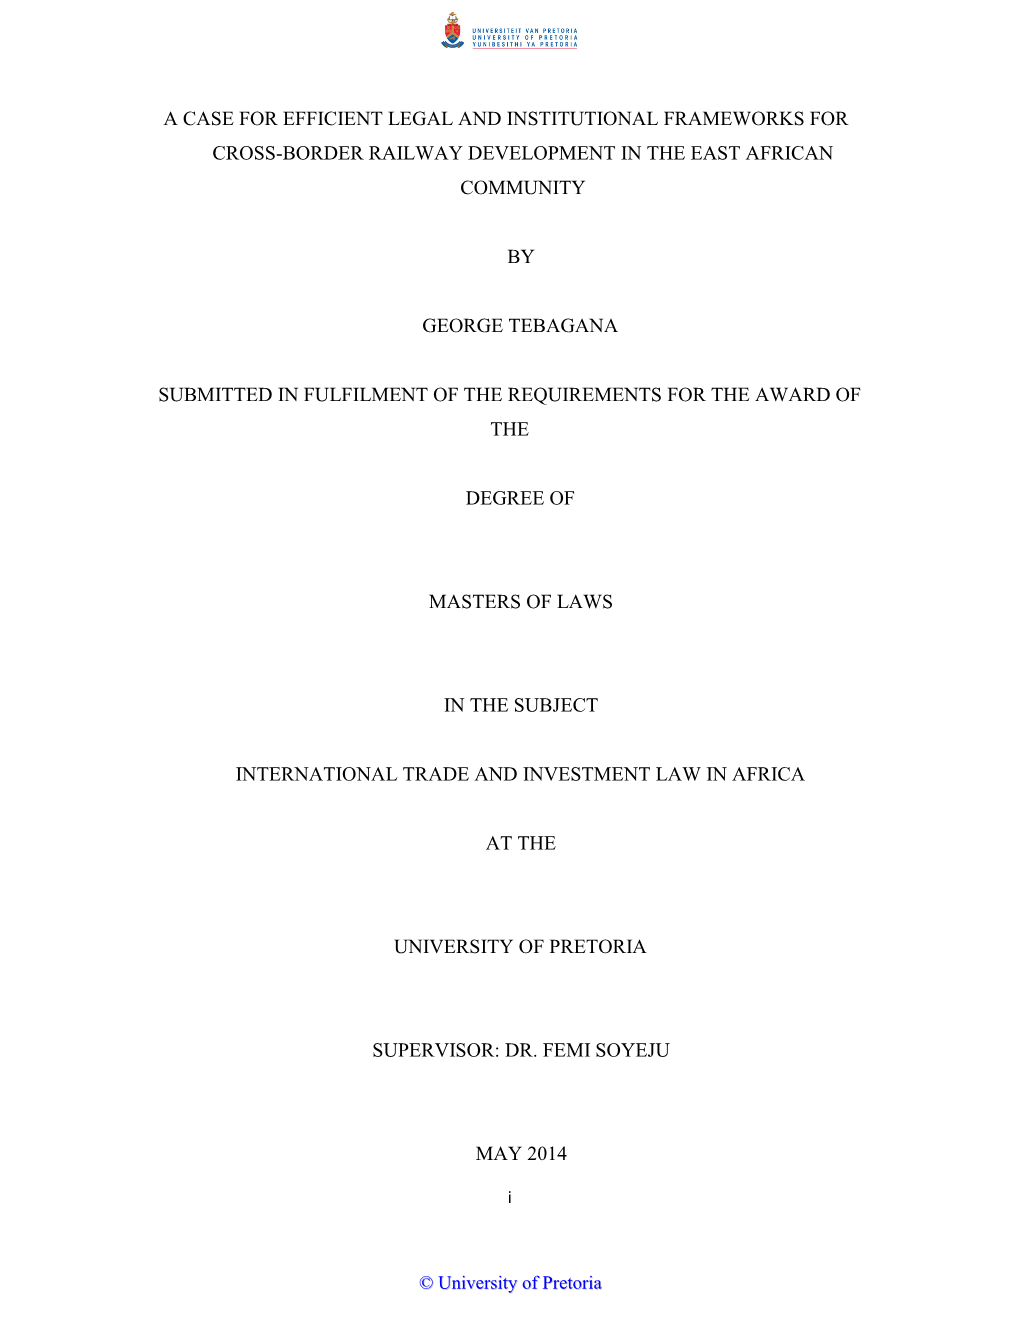 A Case for Efficient Legal and Institutional Frameworks for Cross-Border Railway Development in the East African Community